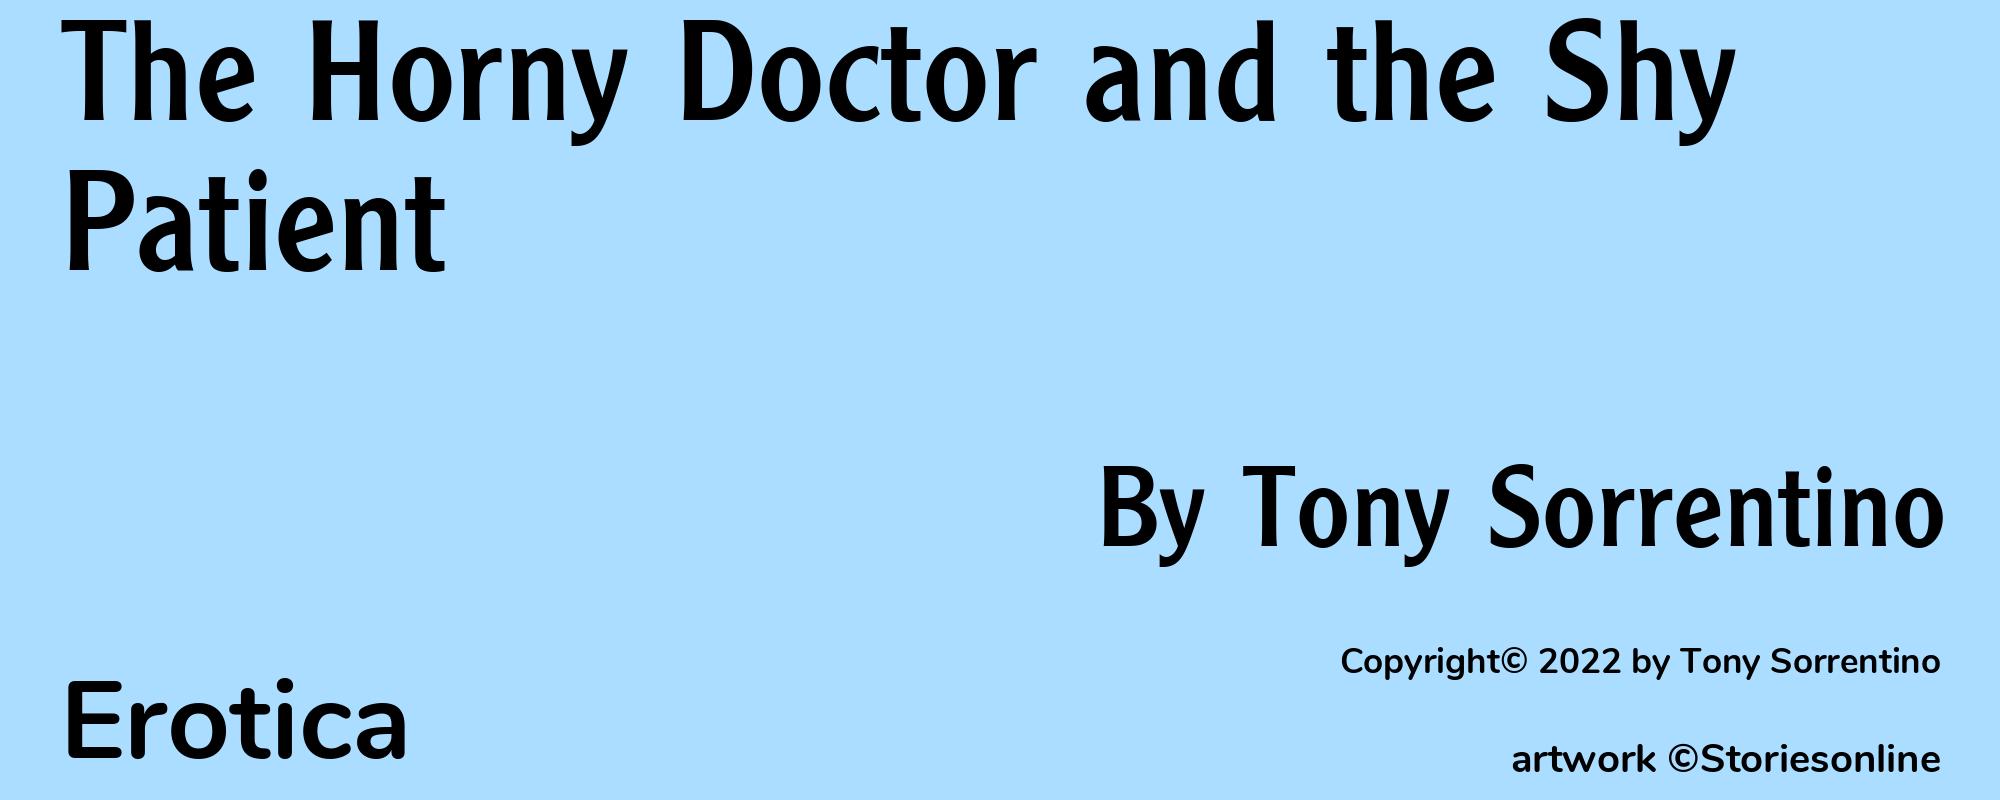 The Horny Doctor and the Shy Patient - Cover